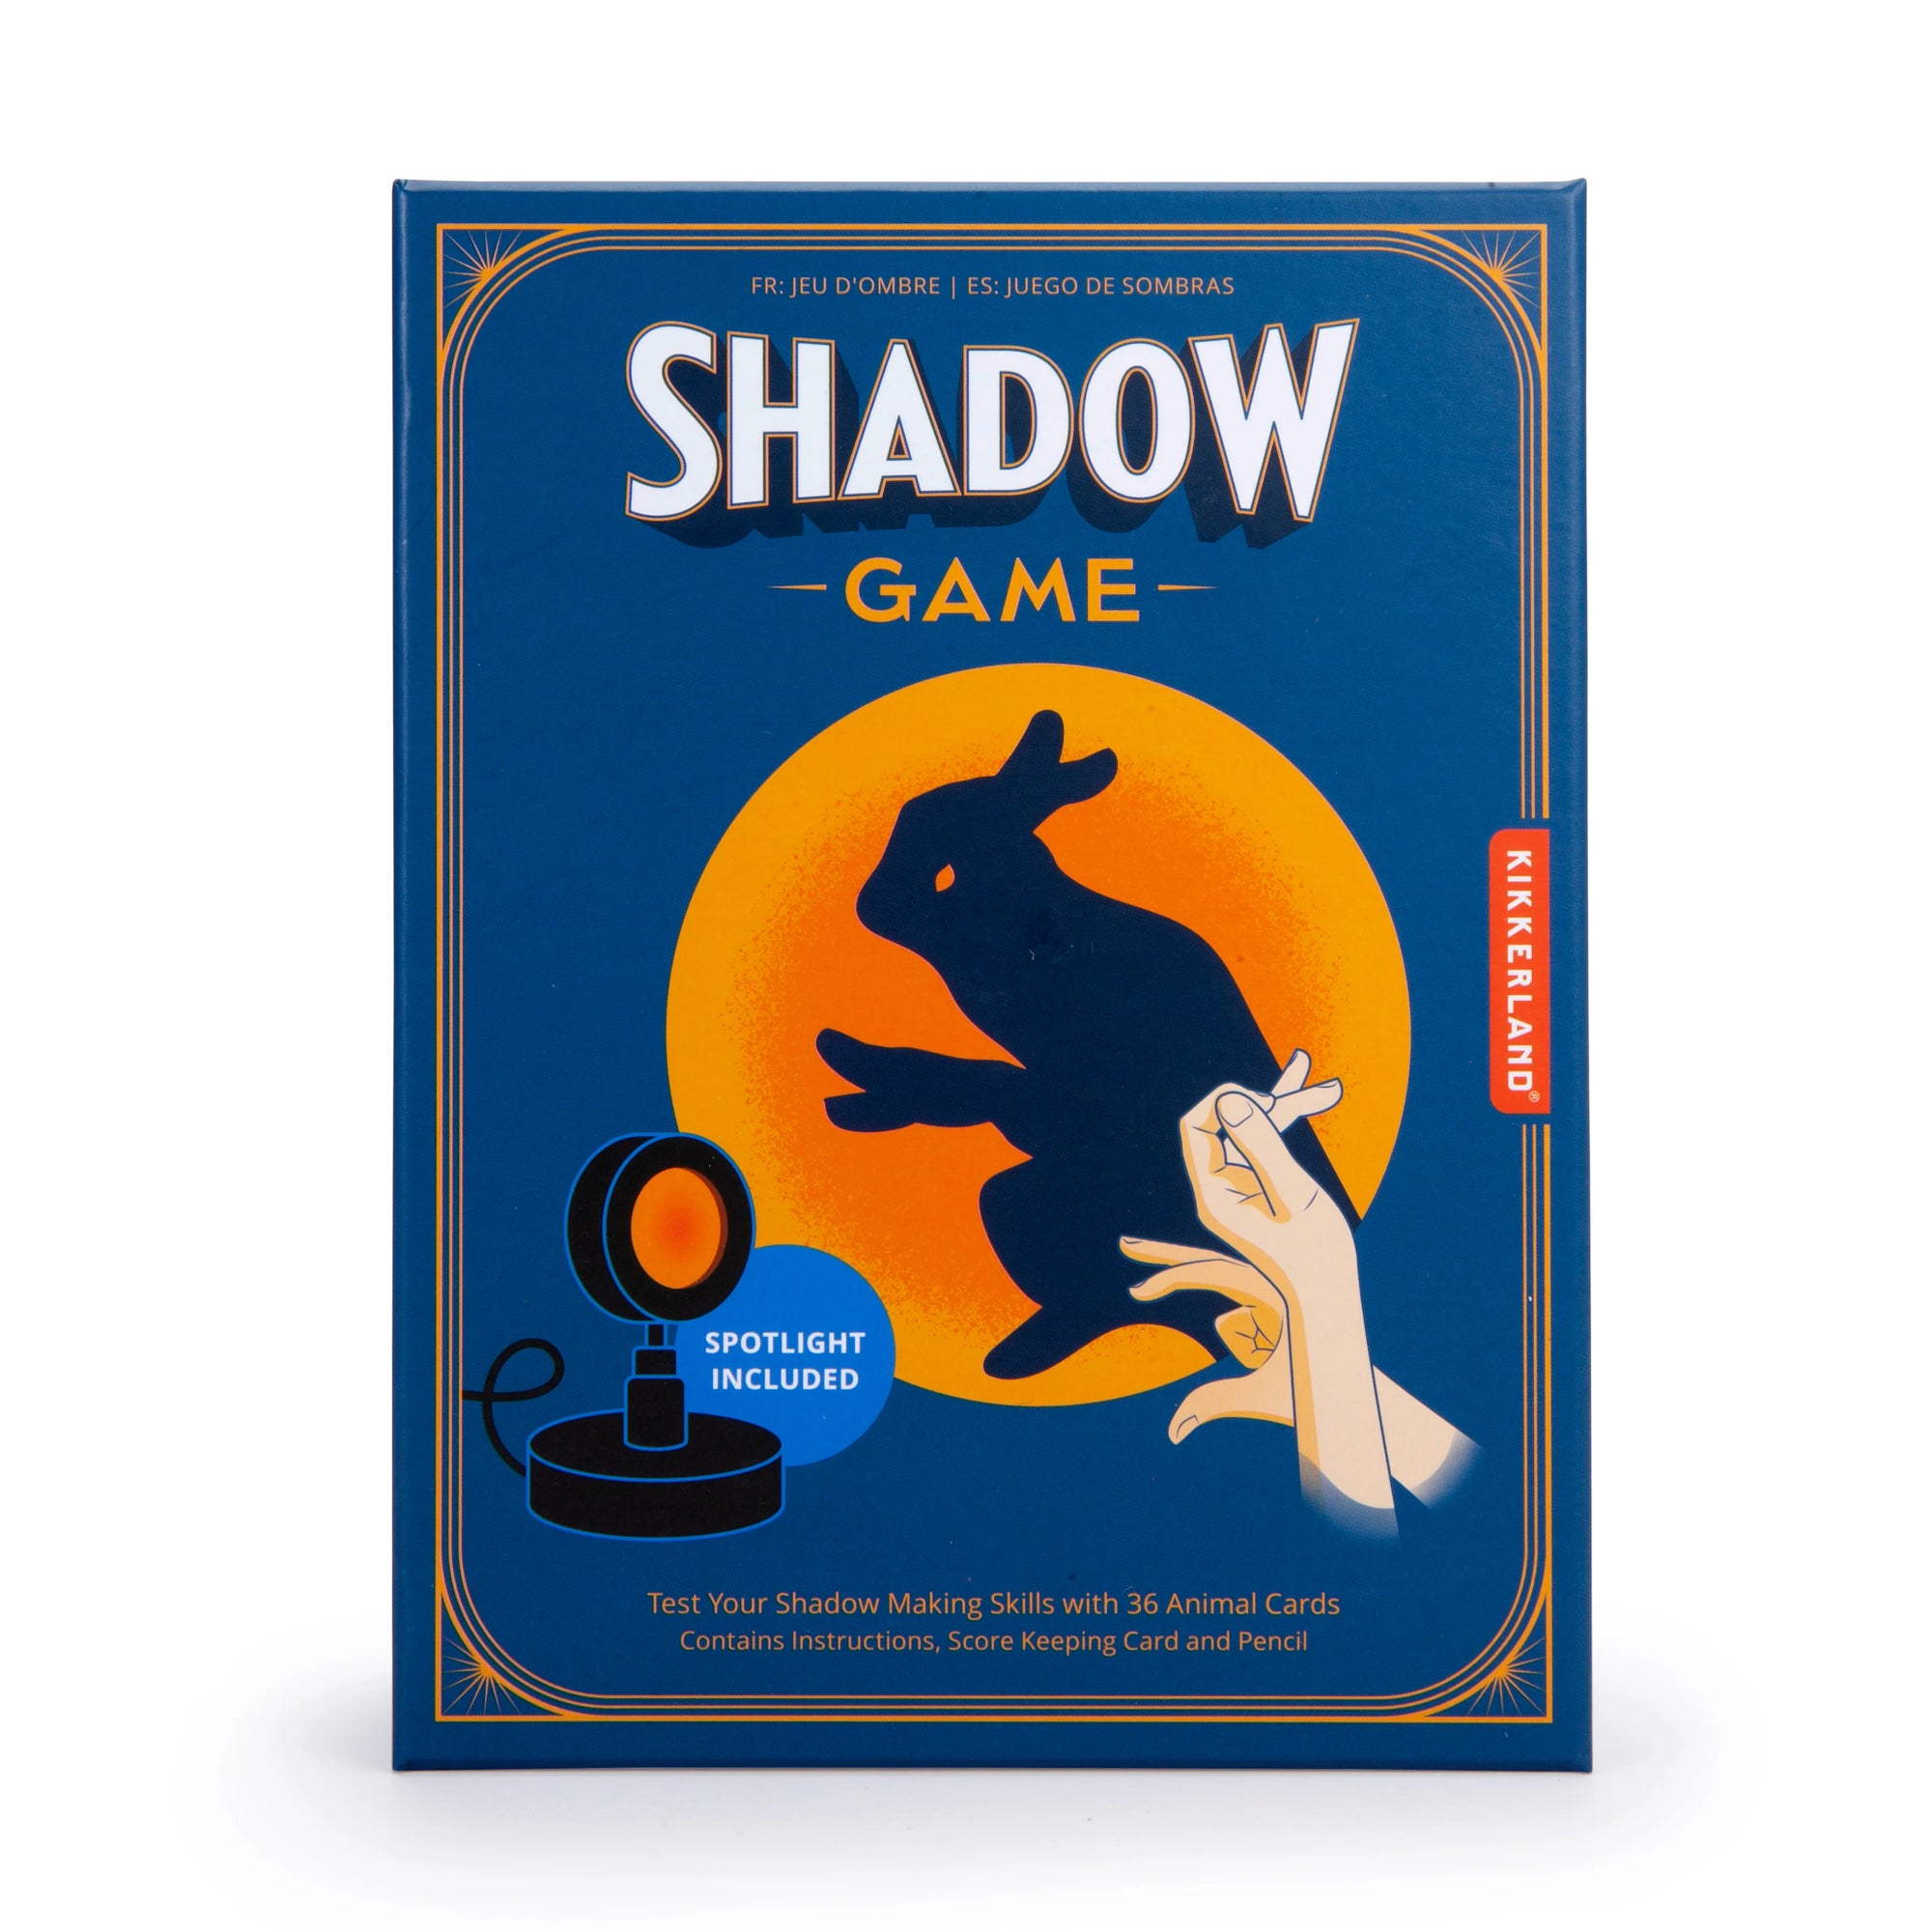 Shadow Game For all